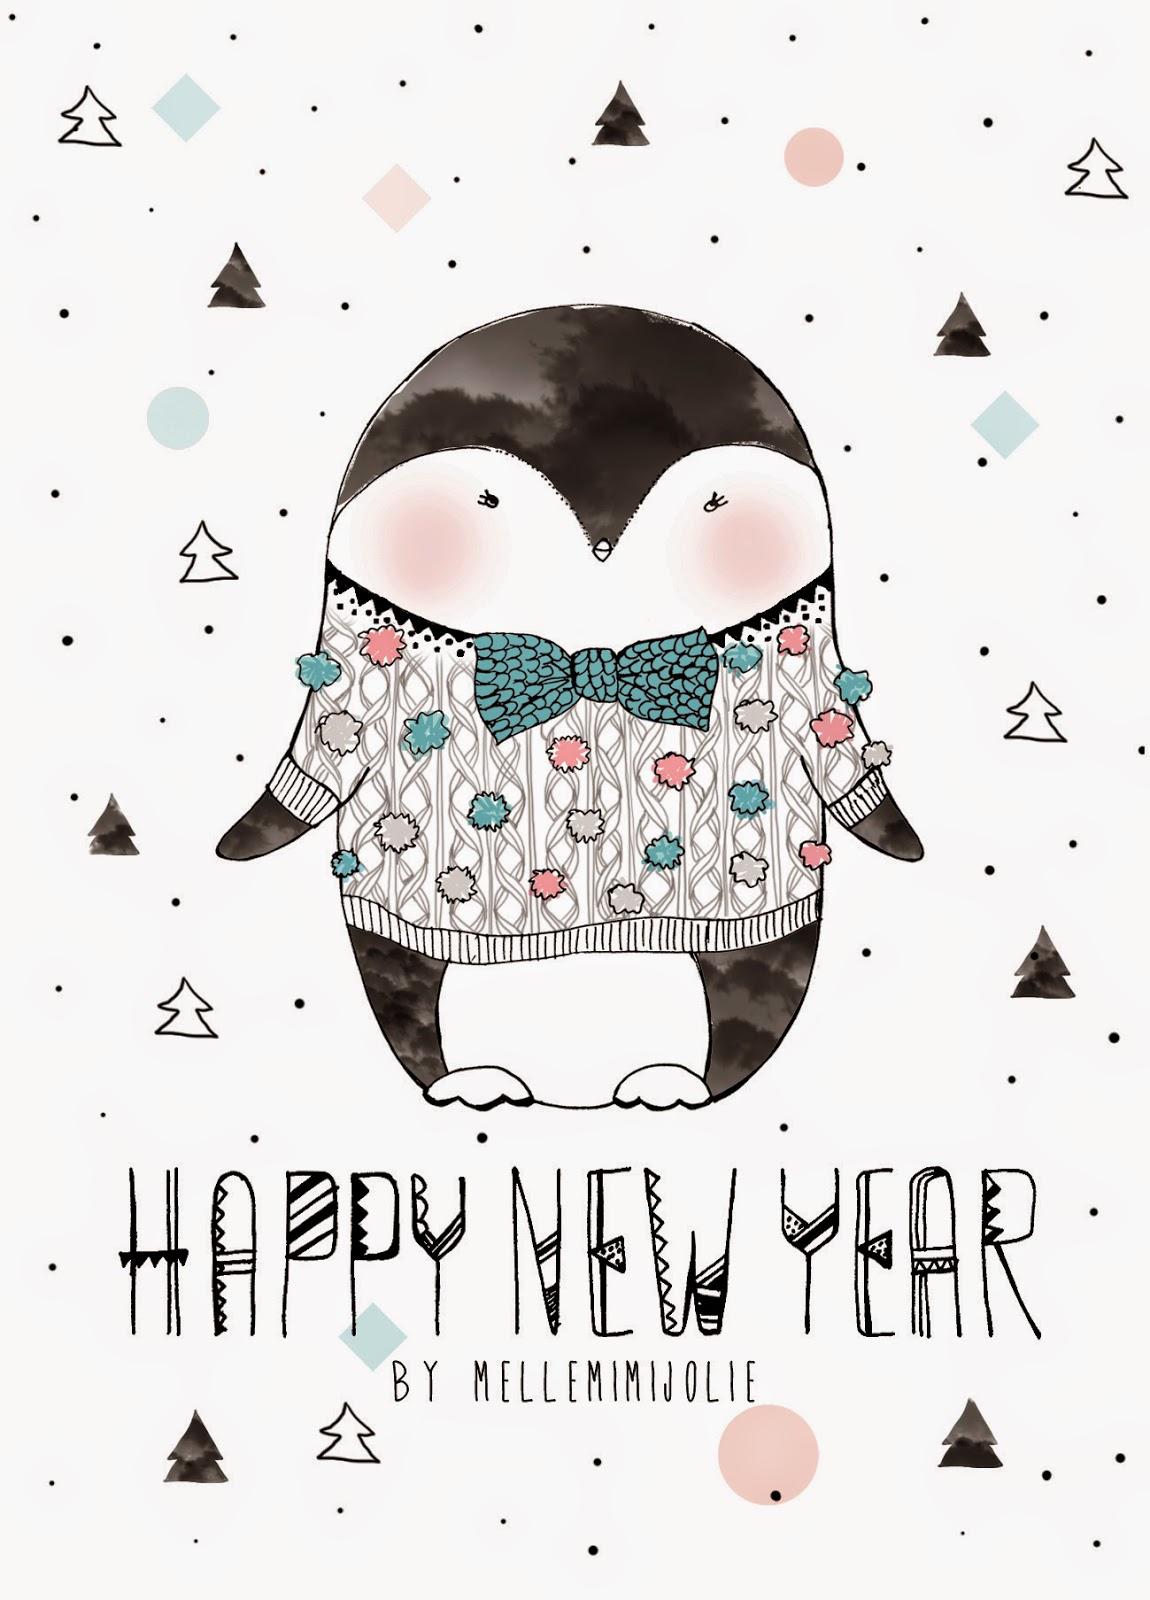 Illustration time: Happy New Year